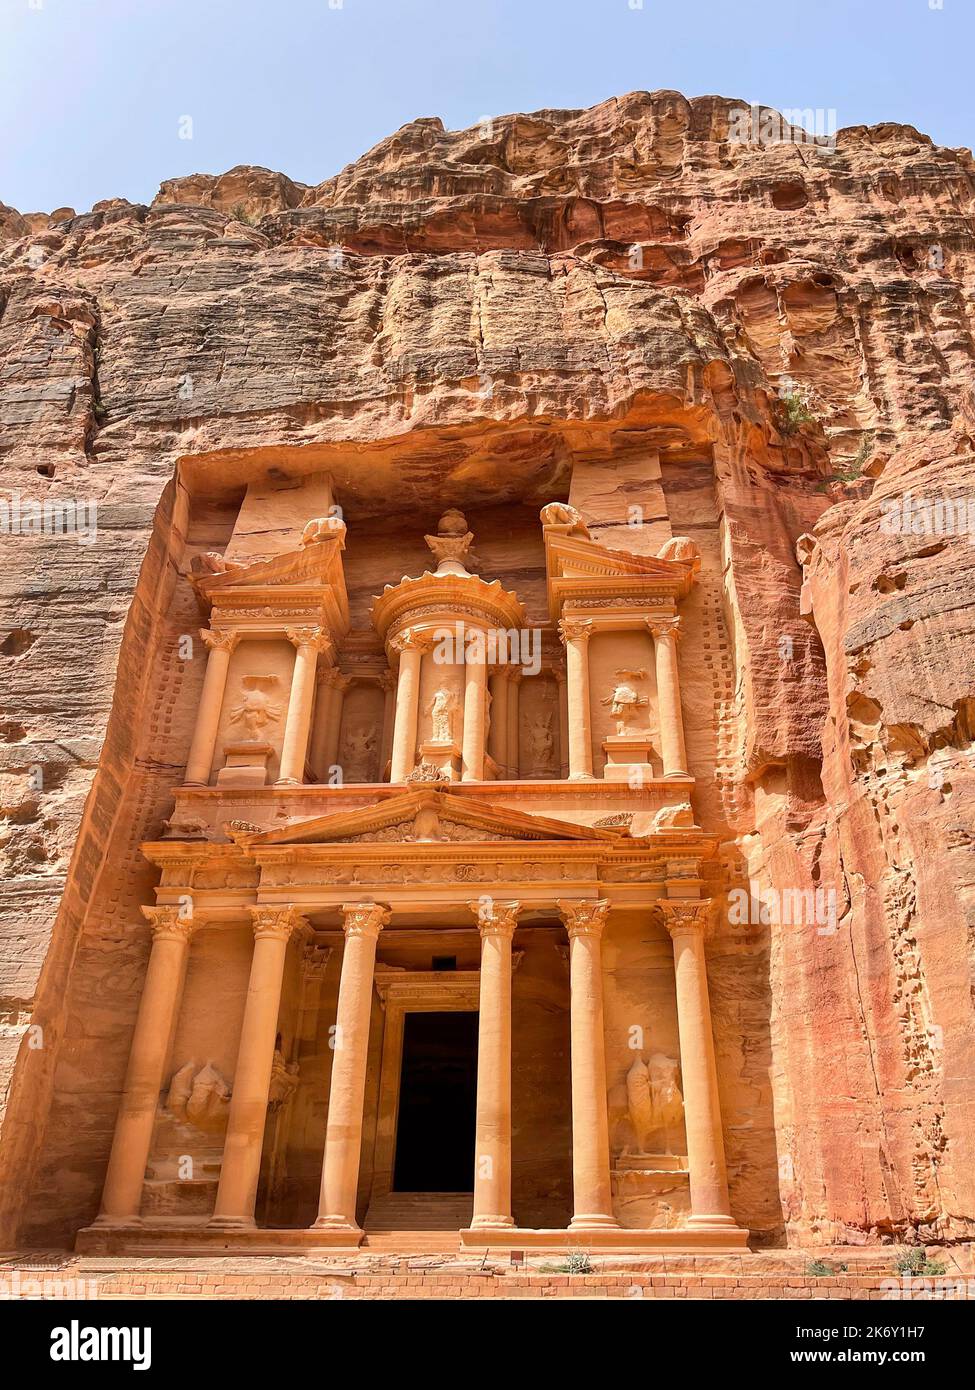 Treasury, the famous monument in Petra, Jordan,a city of the Nabatean Kingdom inhabited by the Arabs in ancient times. It is also known as Al-Khazneh. Stock Photo